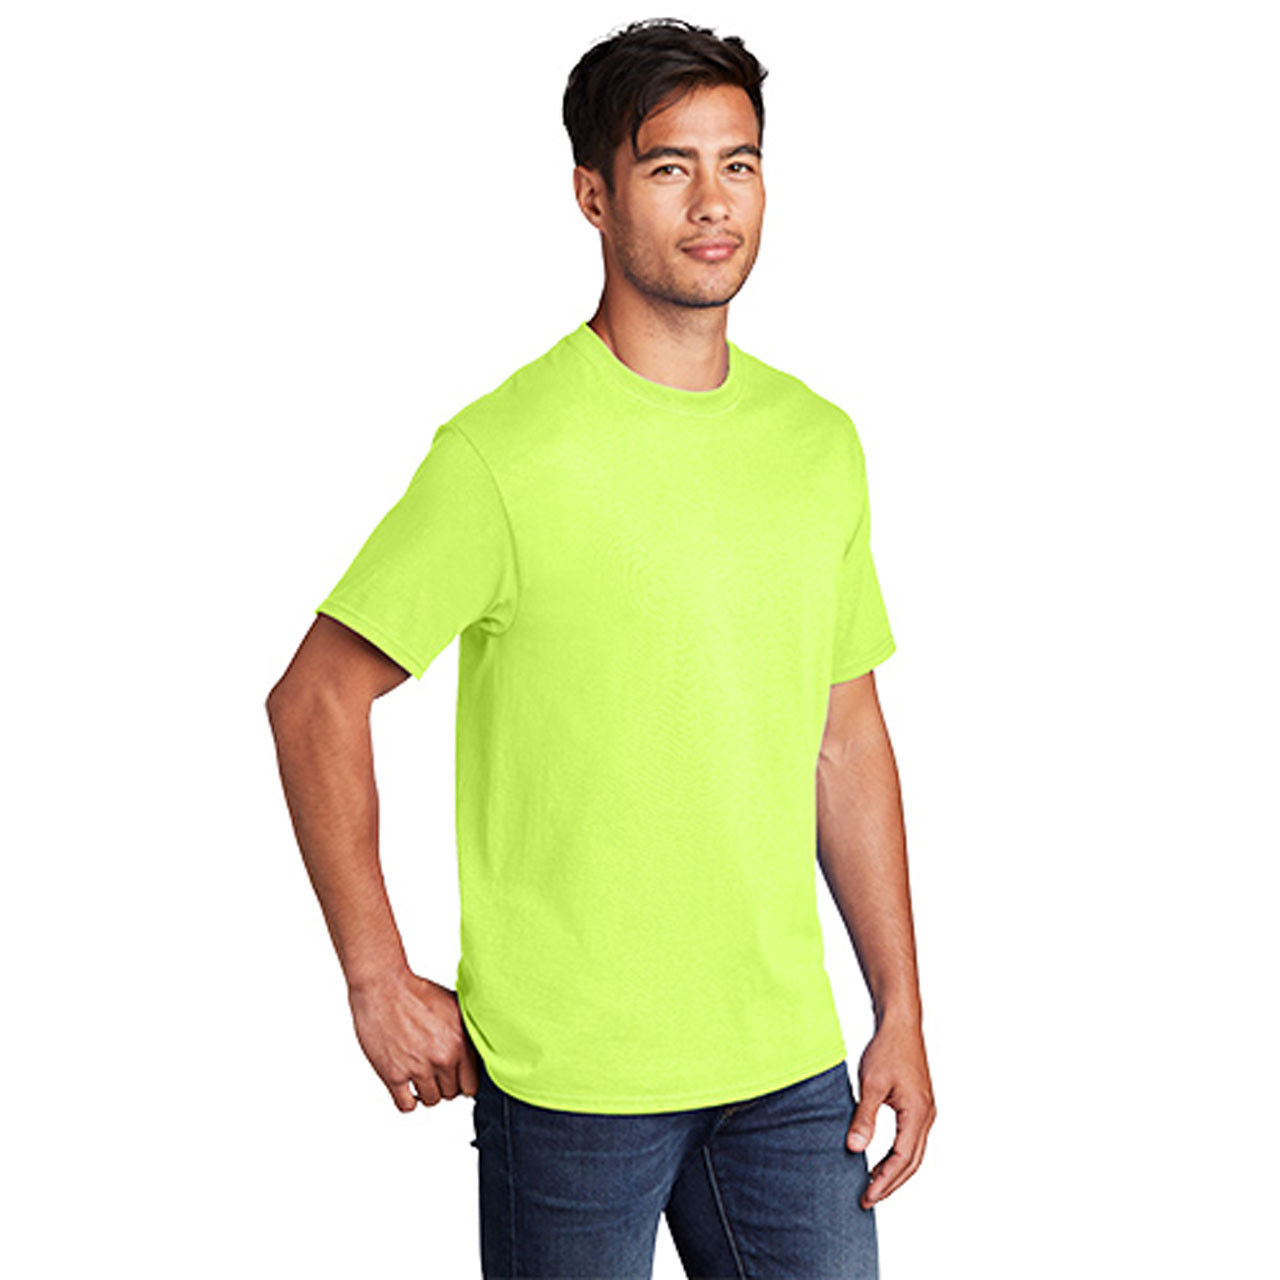 What's the model of these colored t-shirts mens?